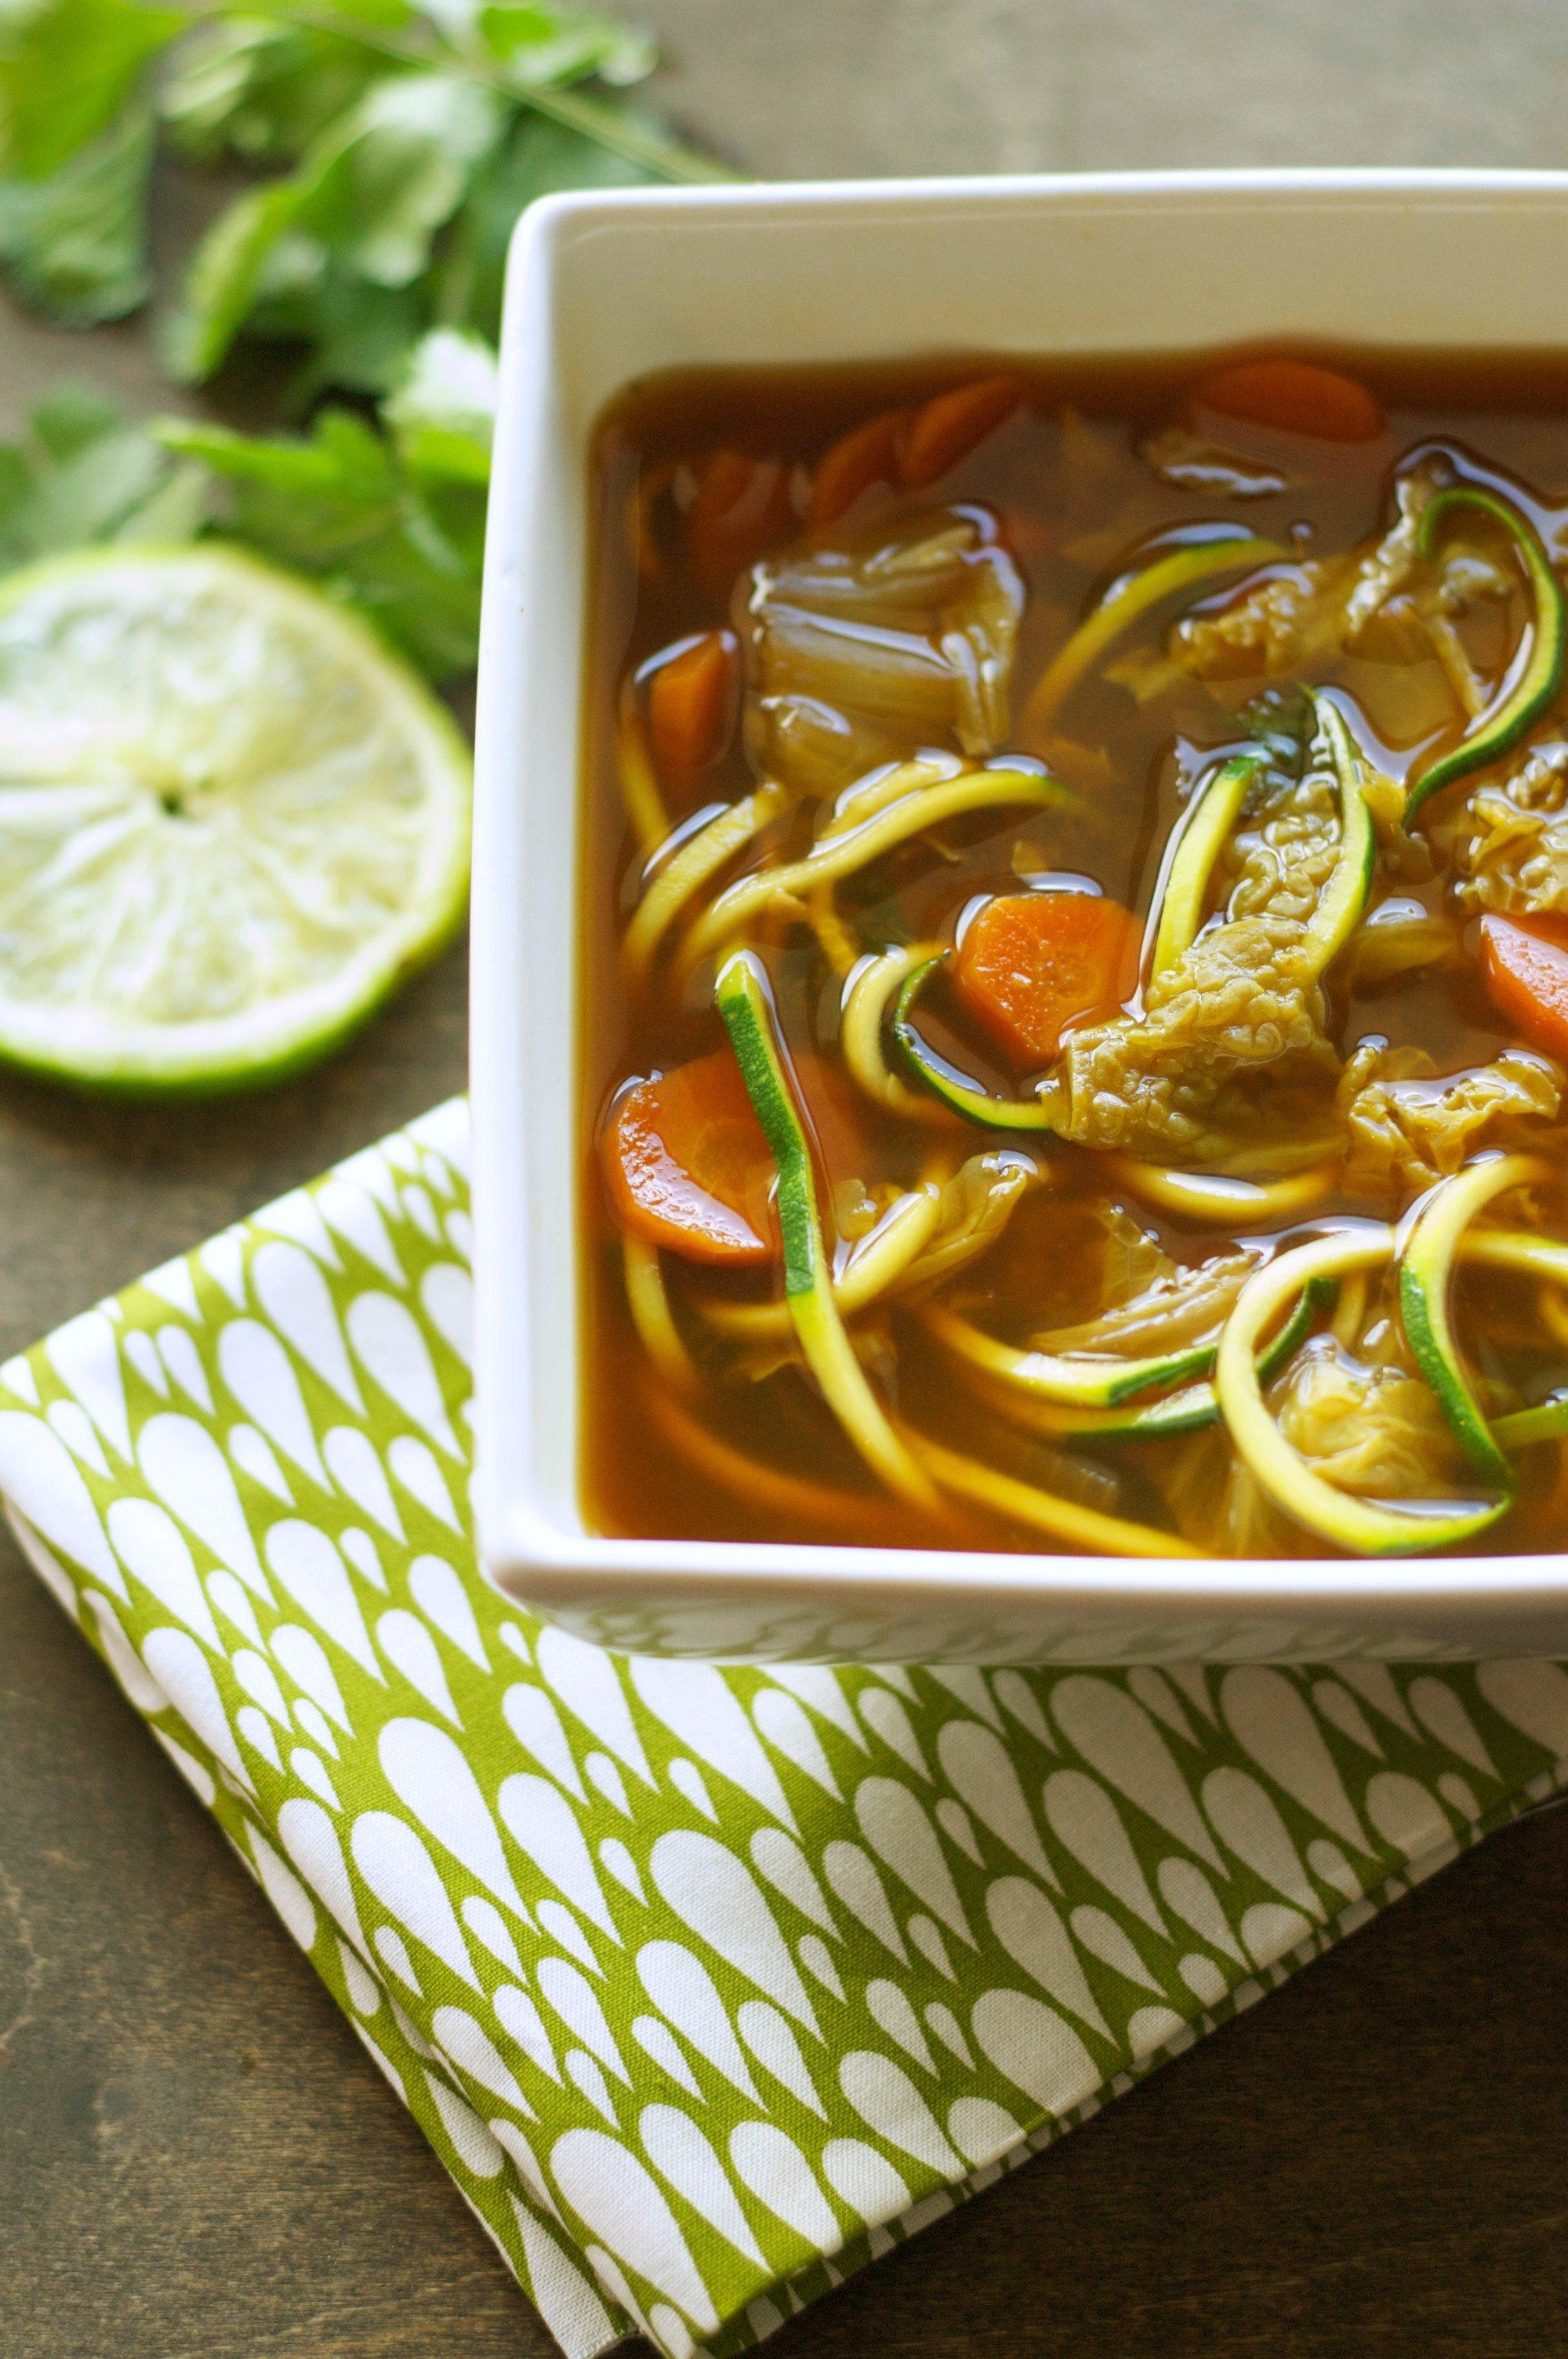 Make The Most Irresistibly Healthy Crockpot Meals With These 26 Recipes